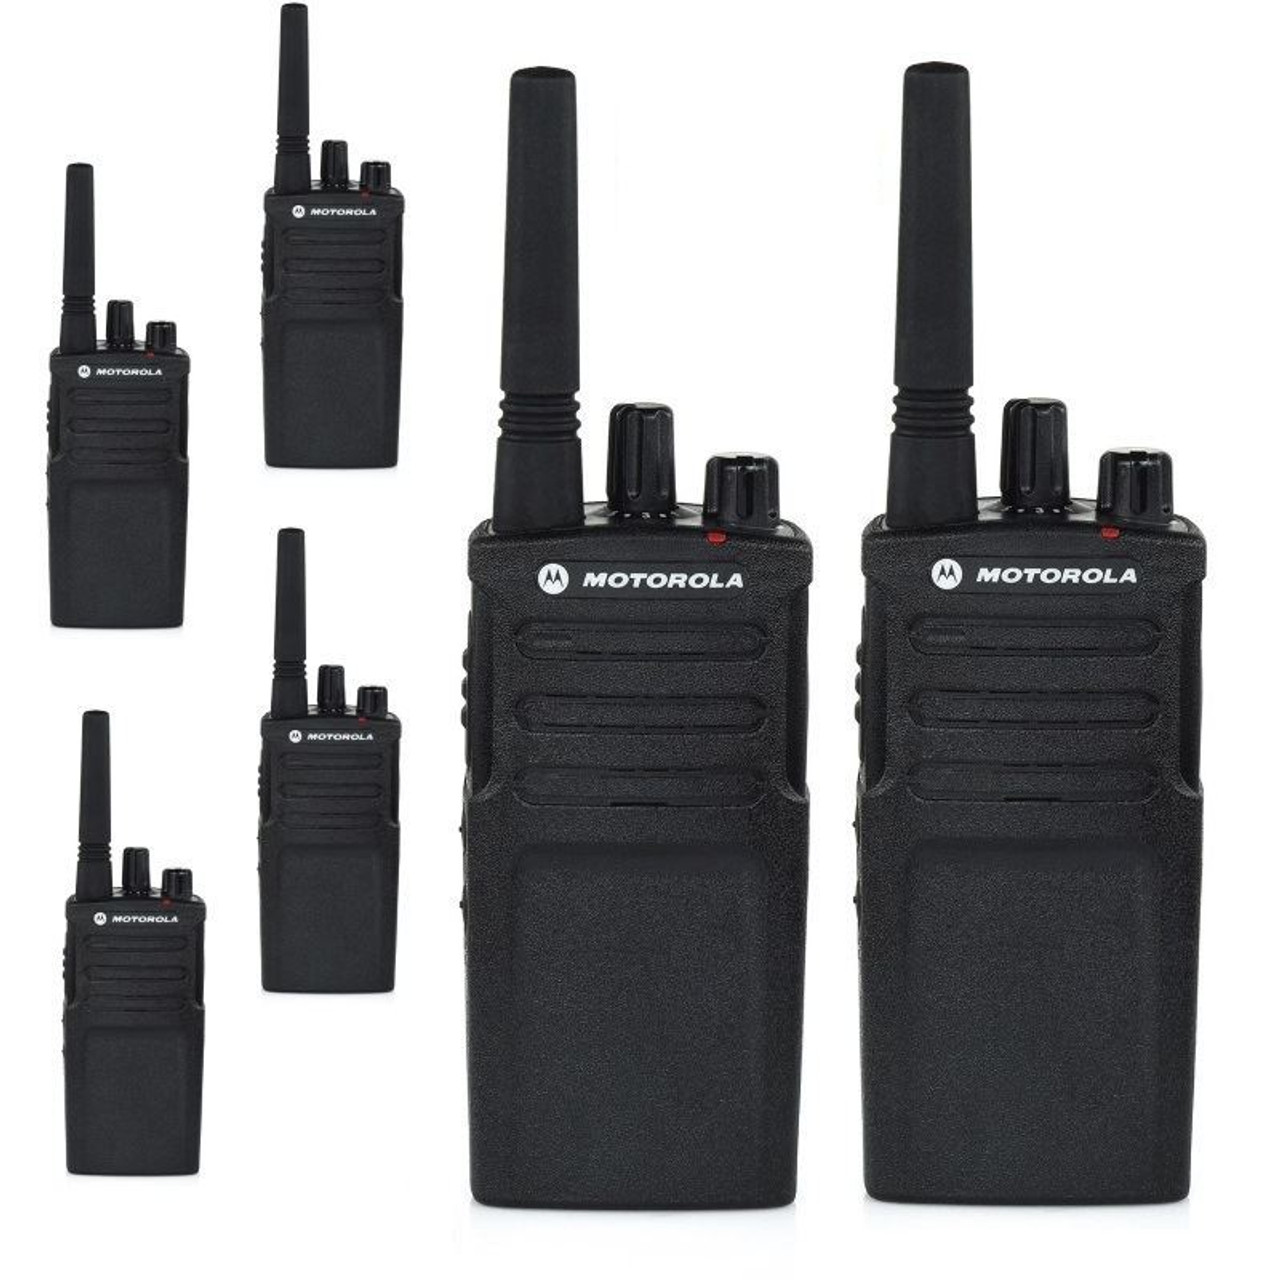 Get this Six Pack of Motorola RMU2080 radios with NOAA is the work horse of  most warehouse and retail stores that want an easy to use radio that is  durable